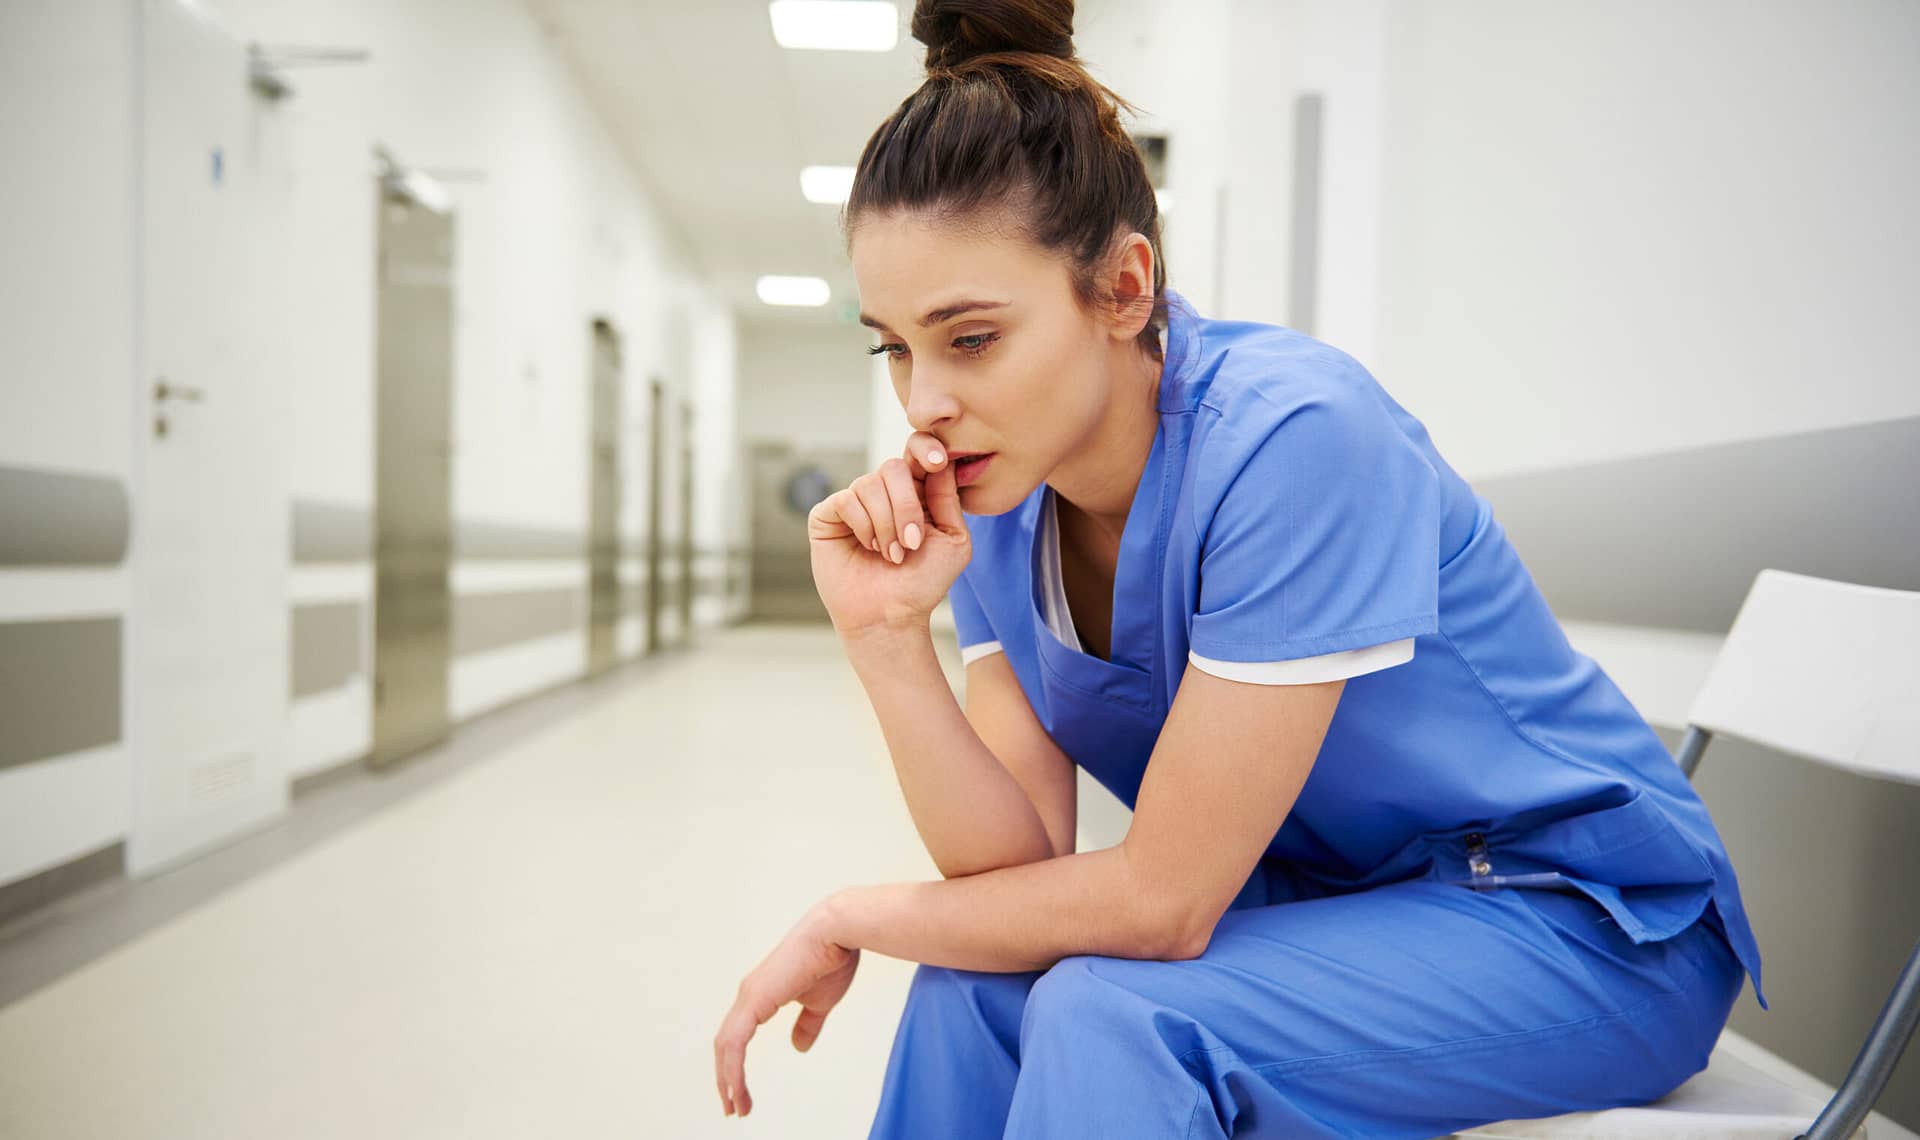 Nurses are struggling with workplace violence on a daily basis.